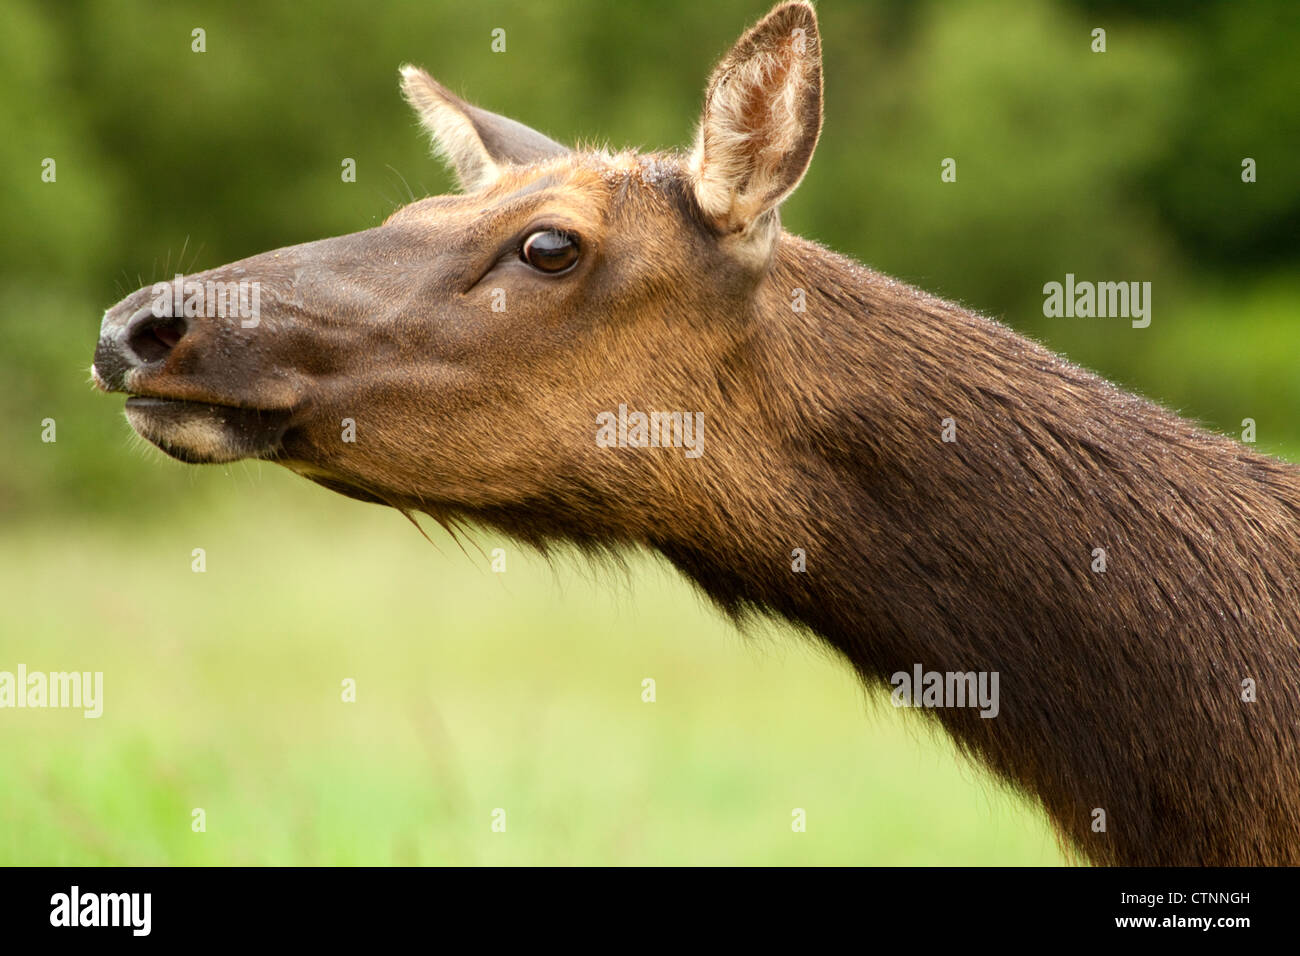 Curious cow elk watching others. COMMON NAME Roosevelt Elk. LATIN NAME Cervus canadensis roosevelti Stock Photo